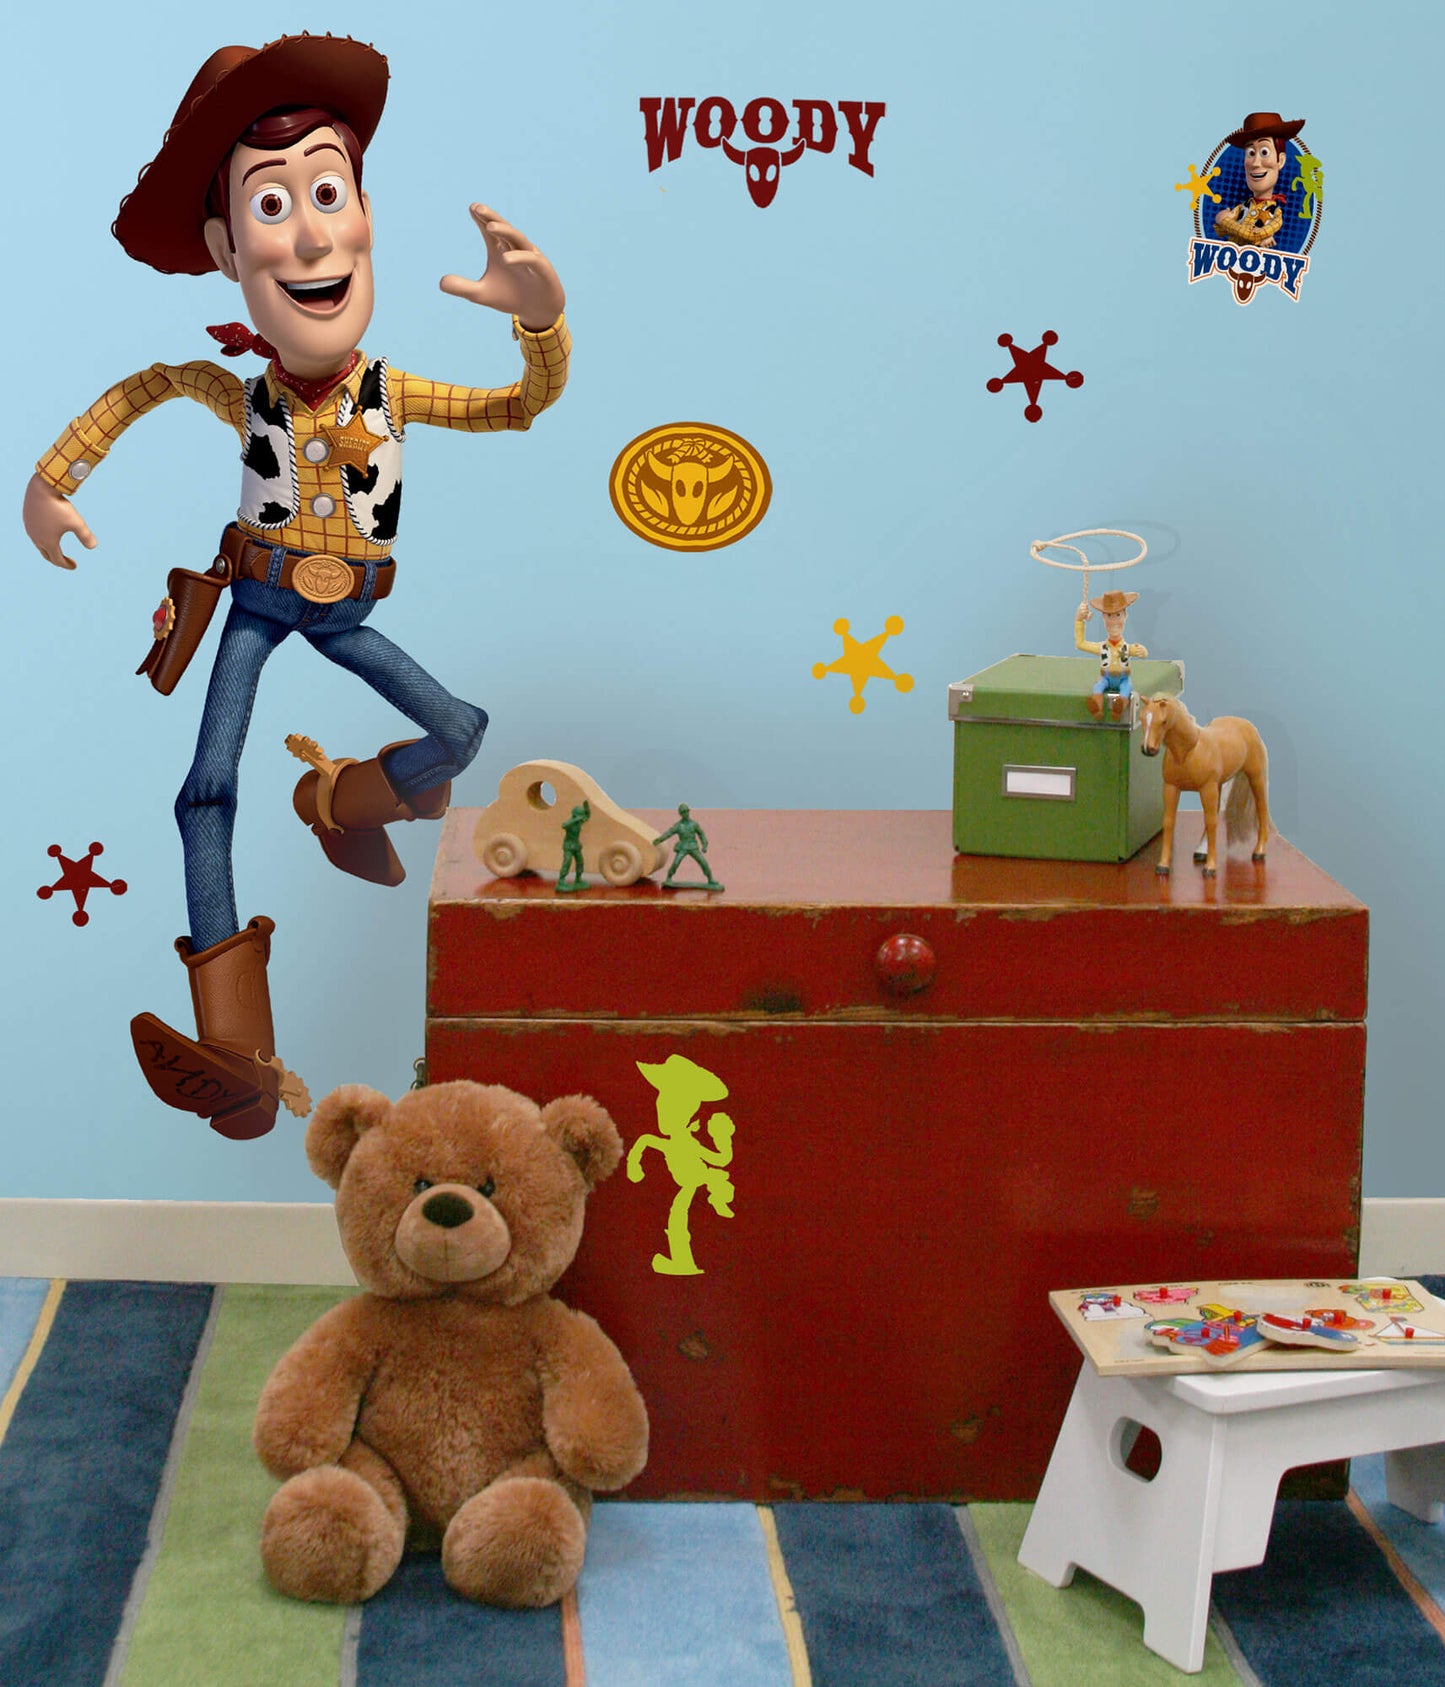 Pixar Toy Story 4 Woody Peel & Stick Wall Decal